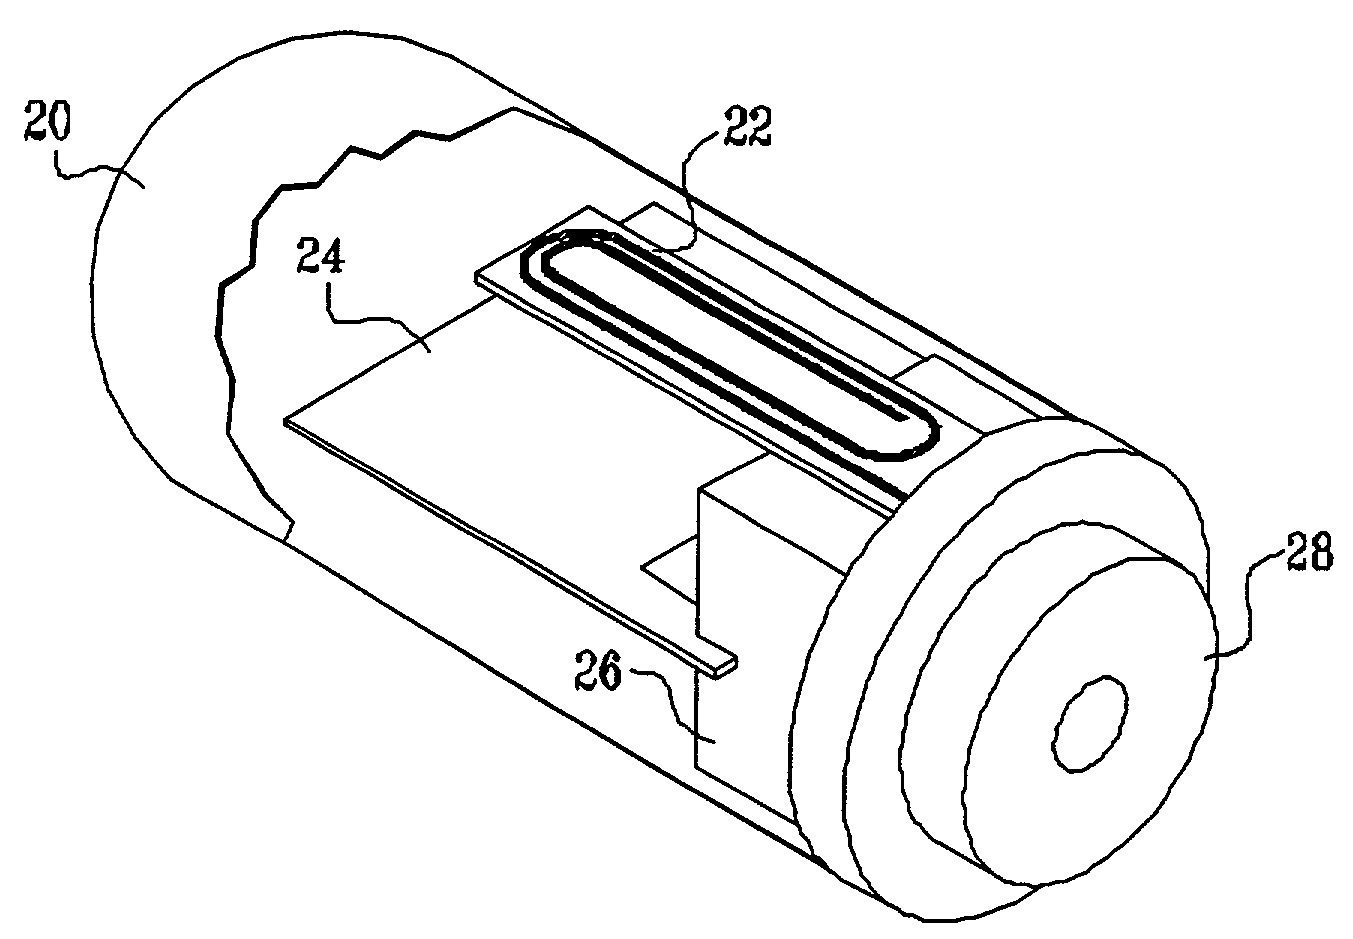 Position sensing system with integral location pad and position display